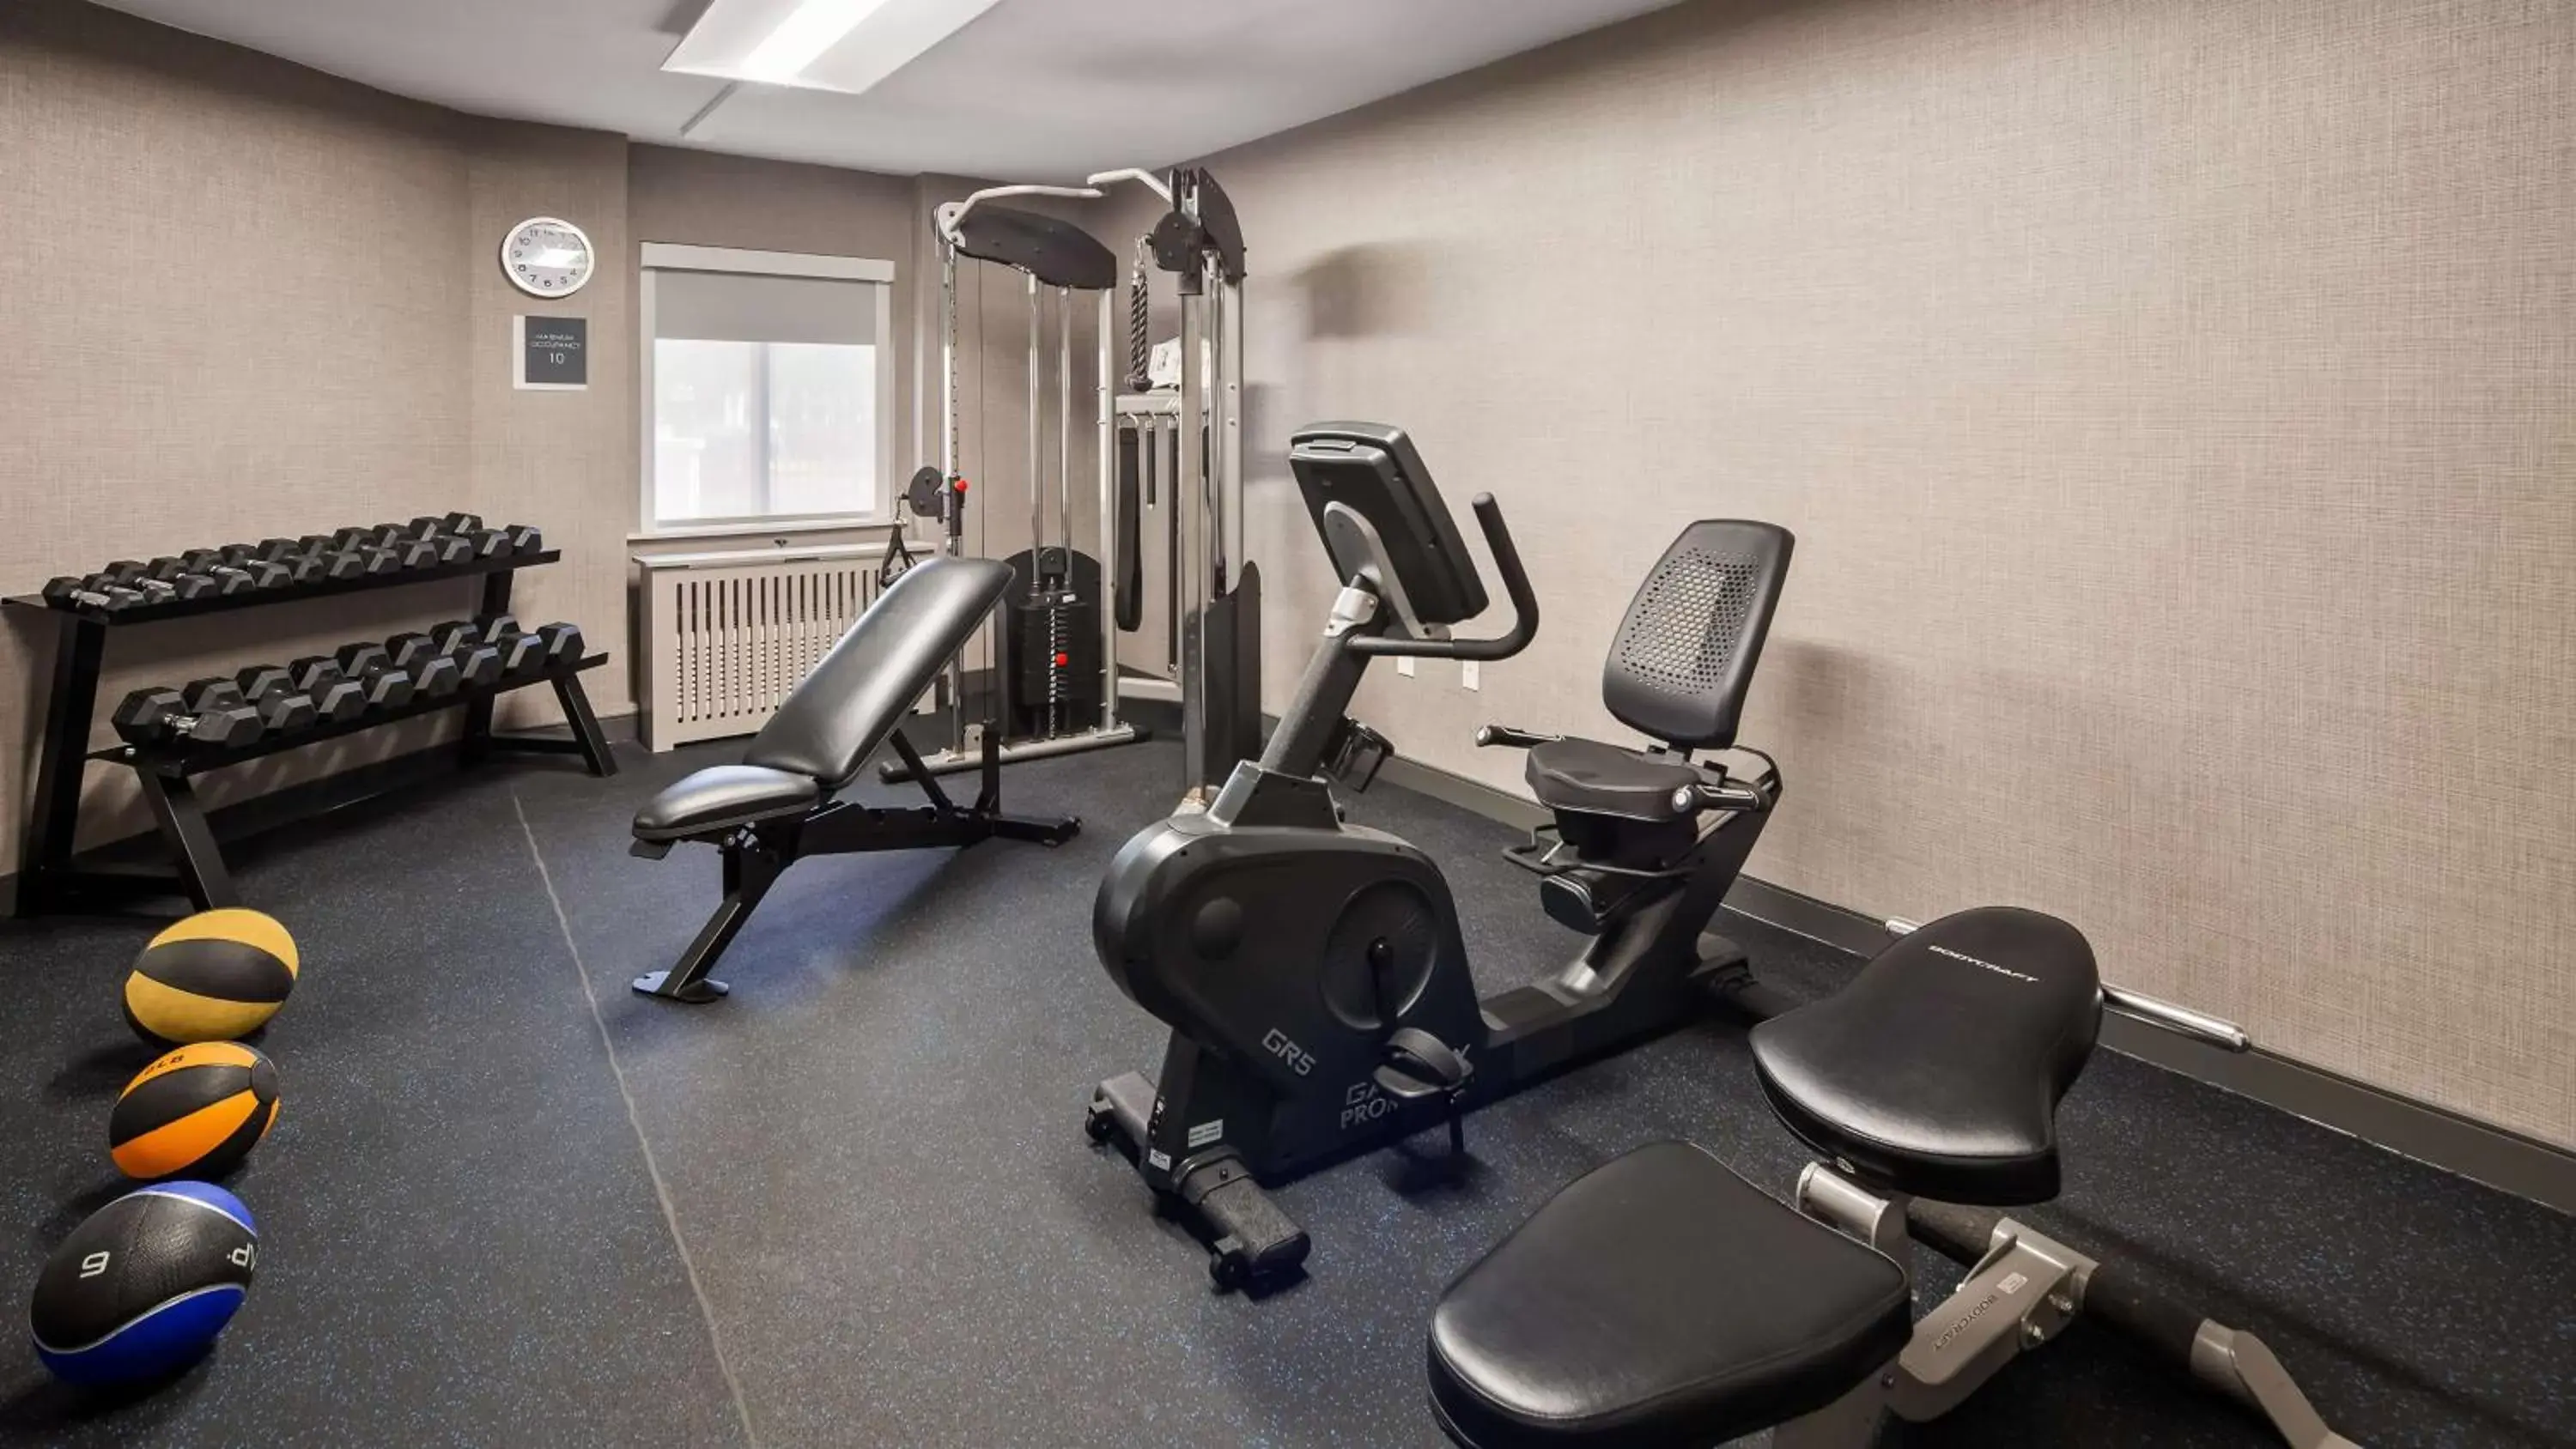 Fitness centre/facilities in Best Western Plus Raleigh Crabtree Valley Hotel